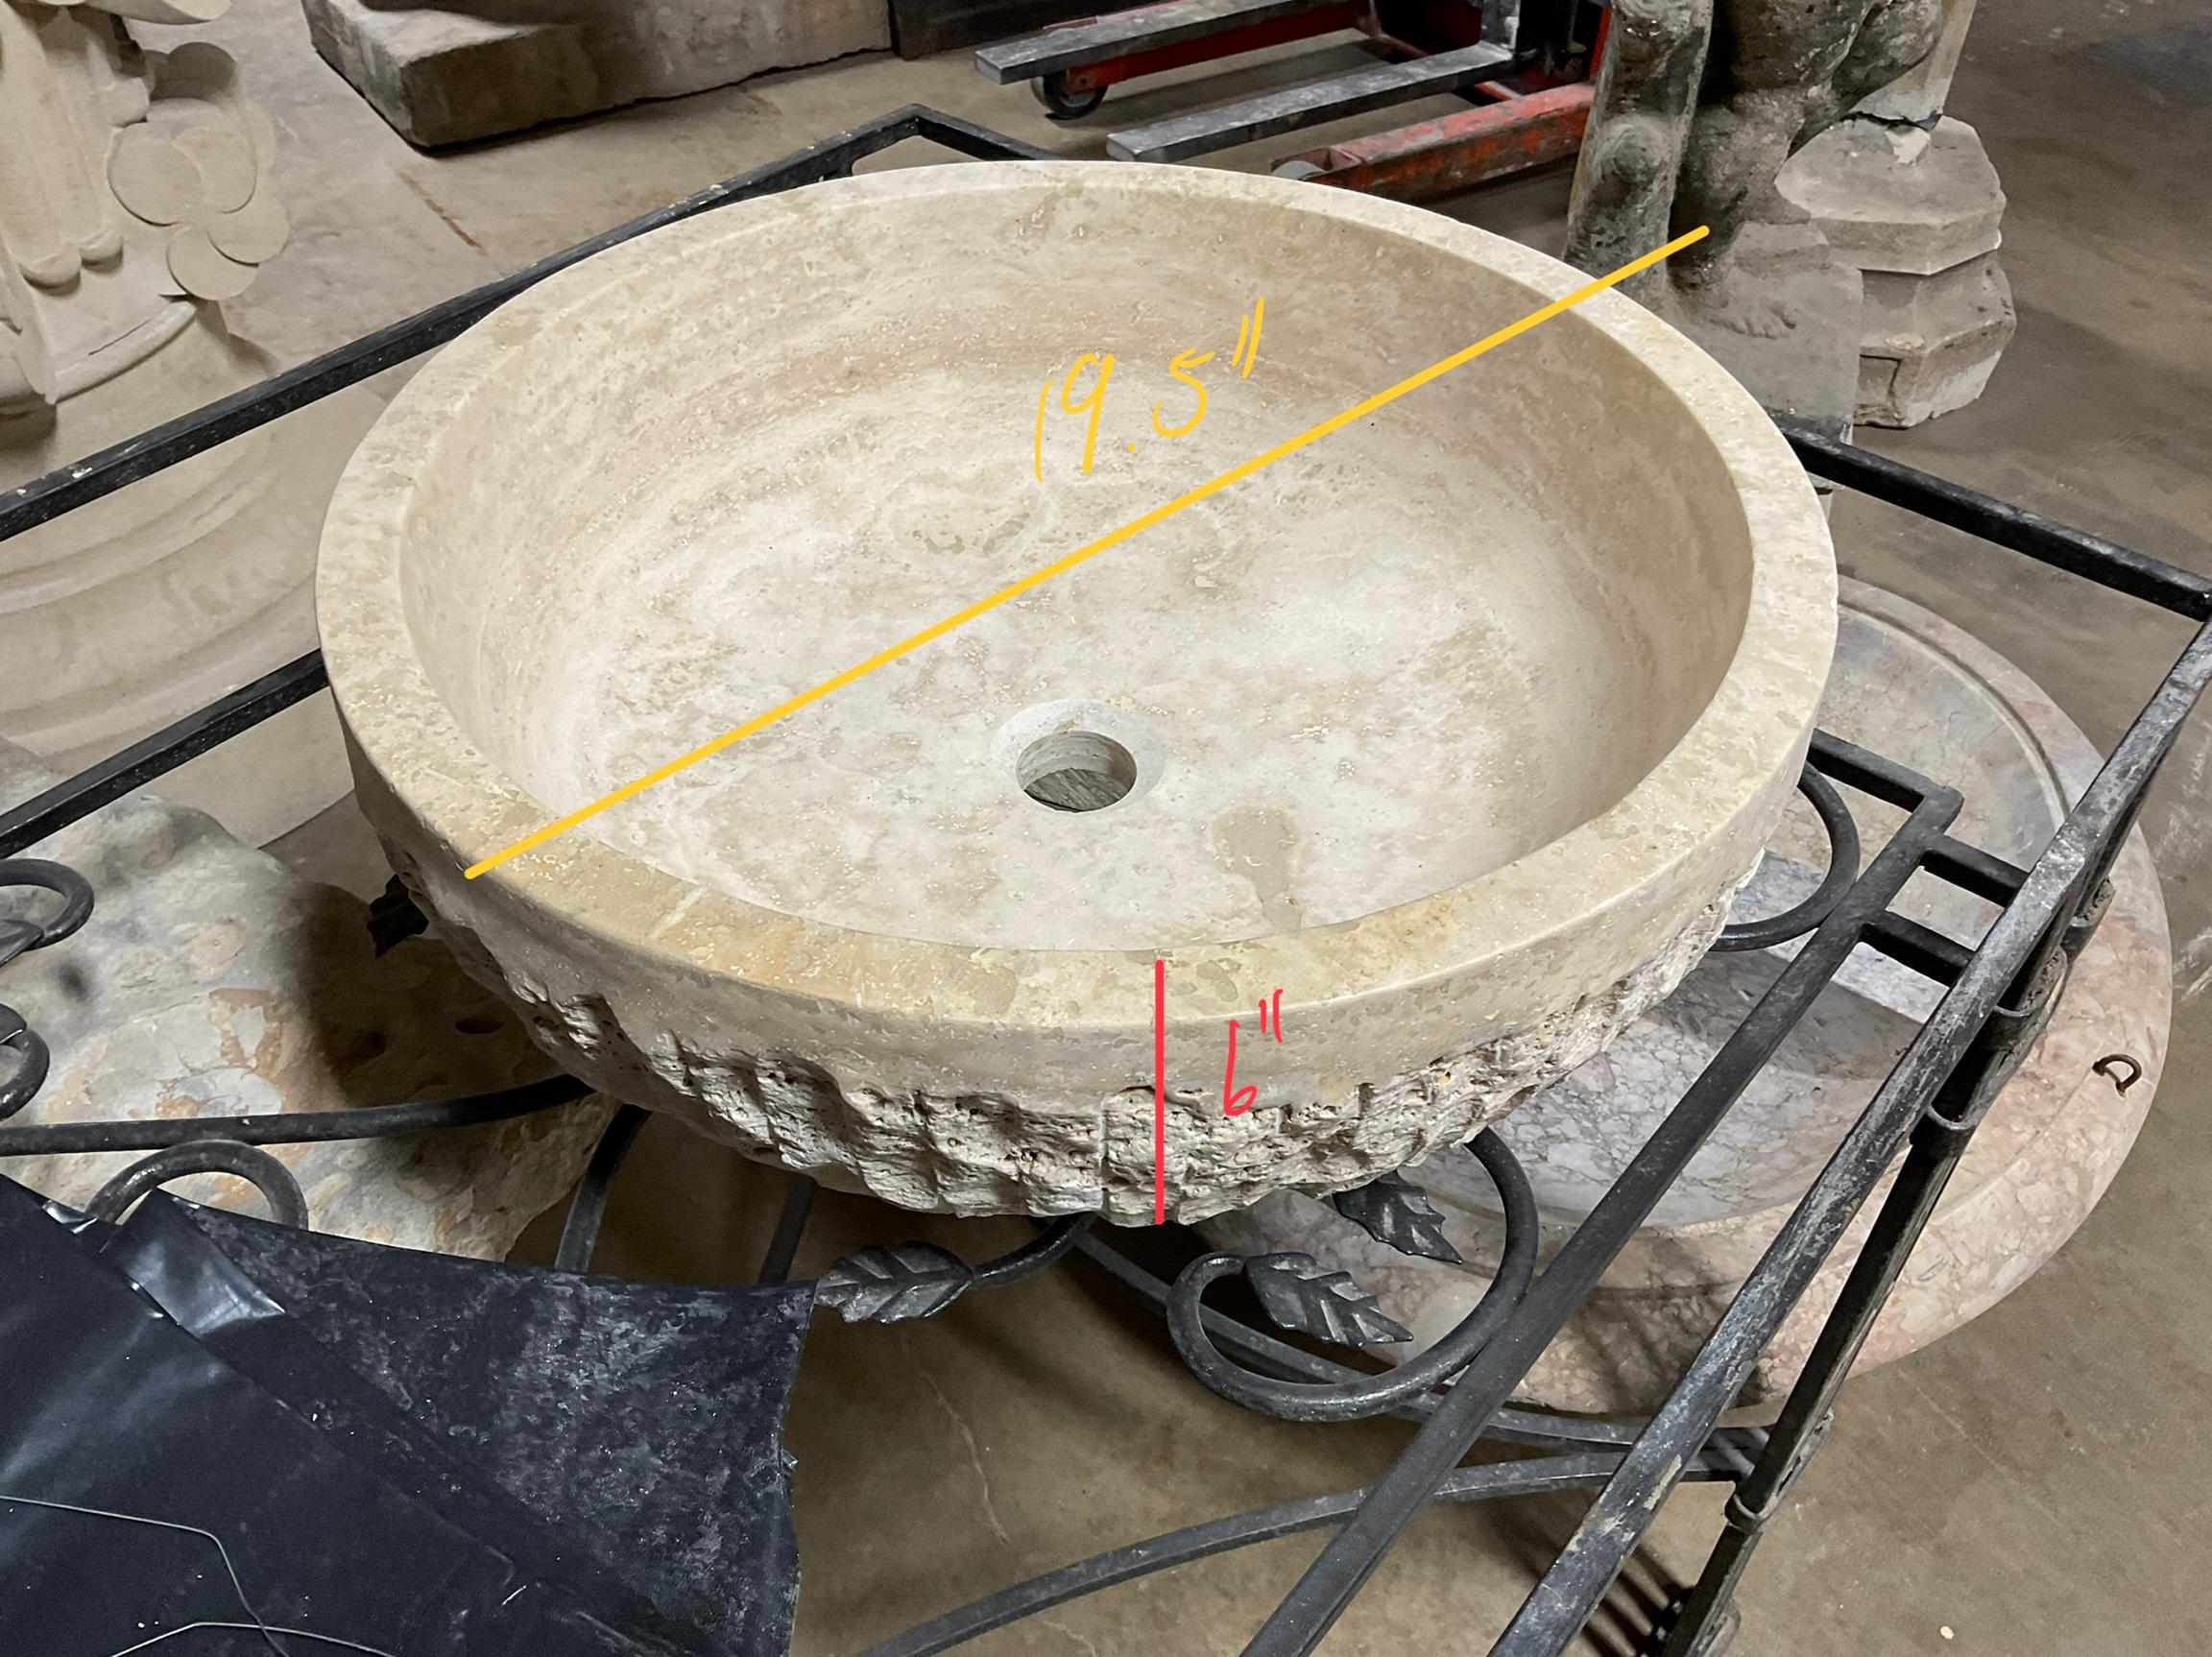 Enhance your modern bathroom with this contemporary Greece travertine sink bowl. Crafted from durable travertine, this sink comes pre-drilled with a drainage hole for easy use. Bring a touch of elegance to your home with this one-of-a-kind vanity